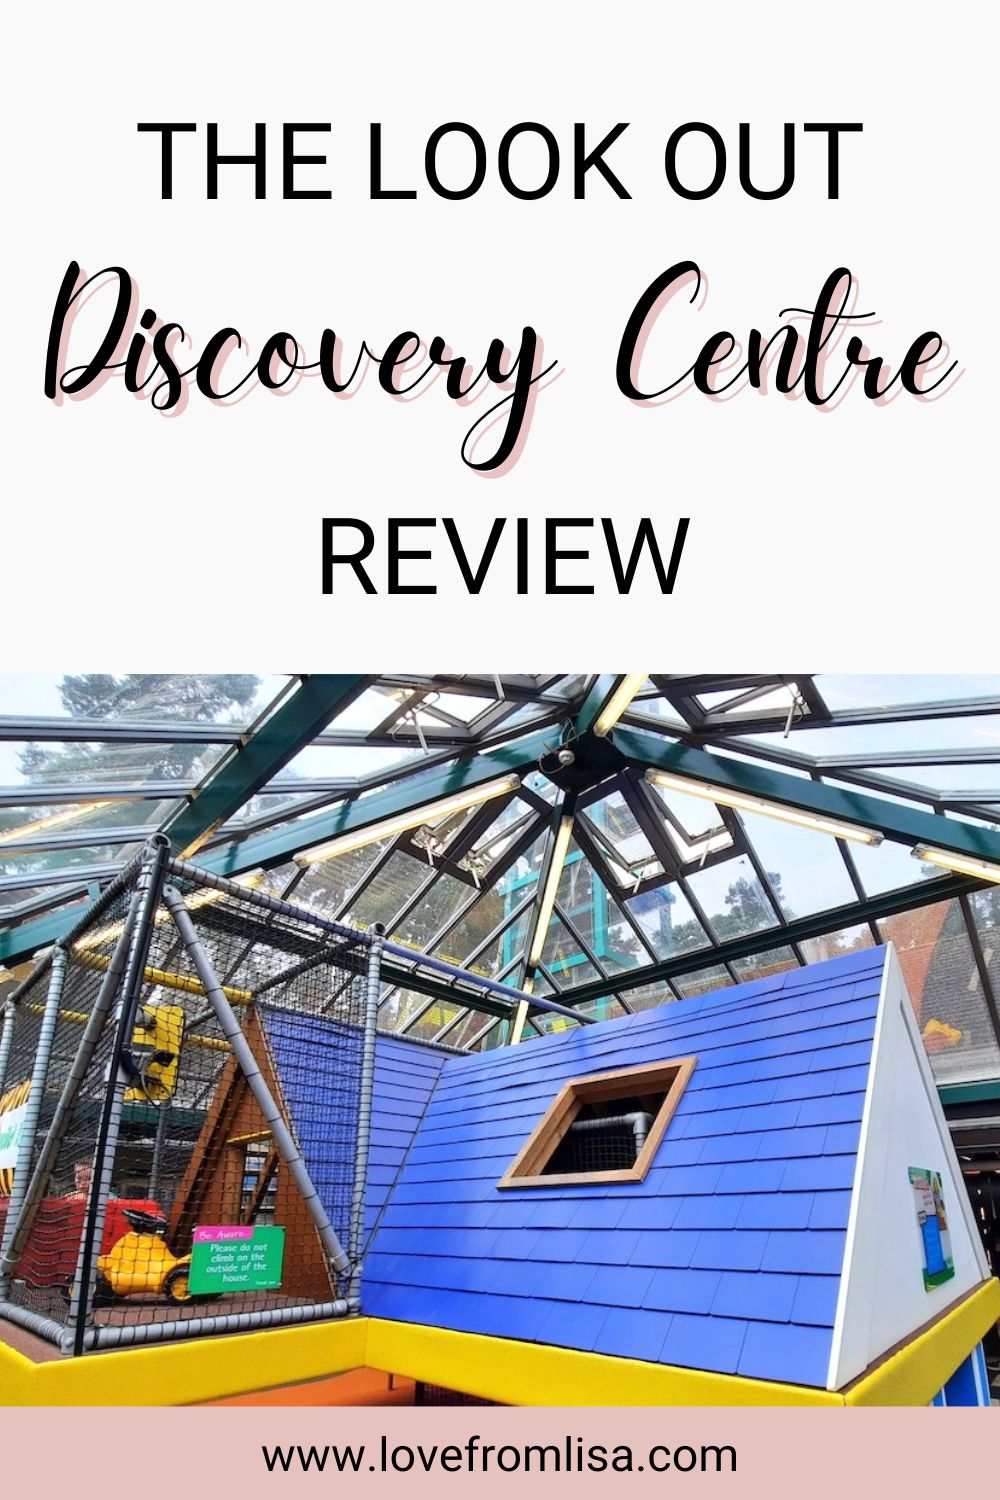 The Look Out Discovery Centre Review